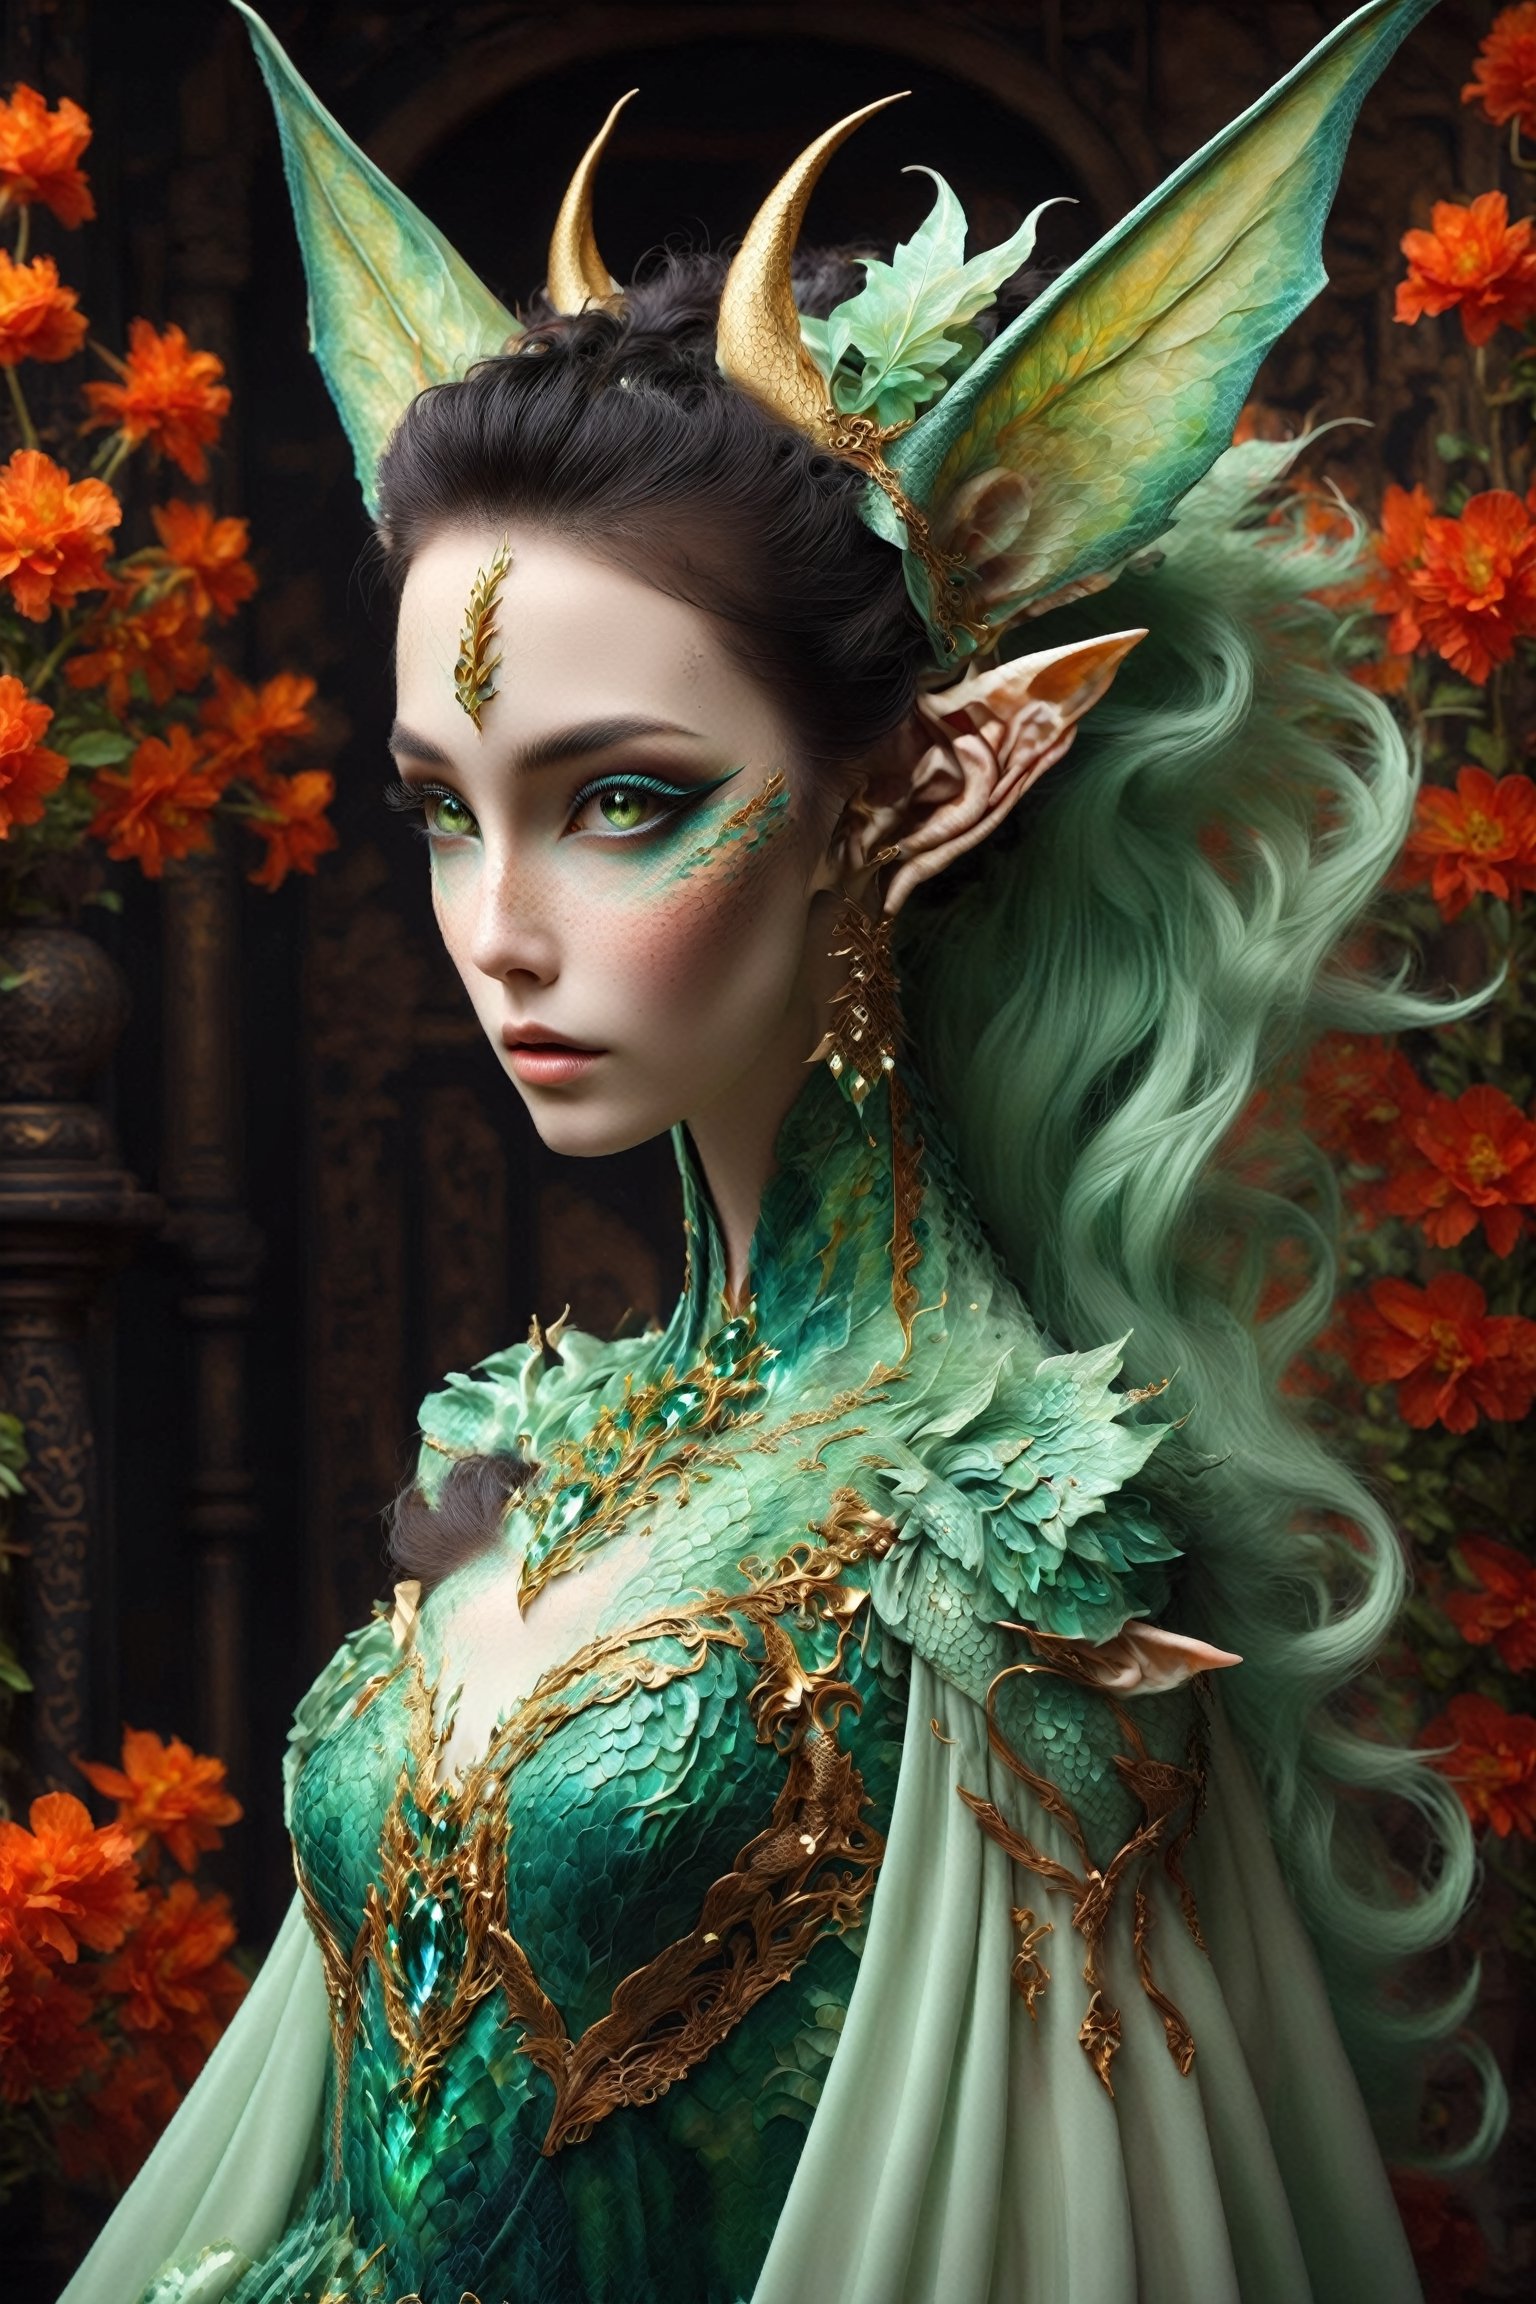 alabaster skin, mystical being, born of the union between a dragon and an elf girl,elf ears,Dragon inspired dress,extraordinary creature exhibits both draconic and elven features, blending the elegance of the elves with the majestic presence of dragons. Its scales might shimmer with ethereal colors, and its pointed ears showcase the elven heritage. This hybrid being represents the harmonious fusion of two fantastical worlds, embodying a unique and captivating presence.,DonM3lv3sXL,Disney pixar style